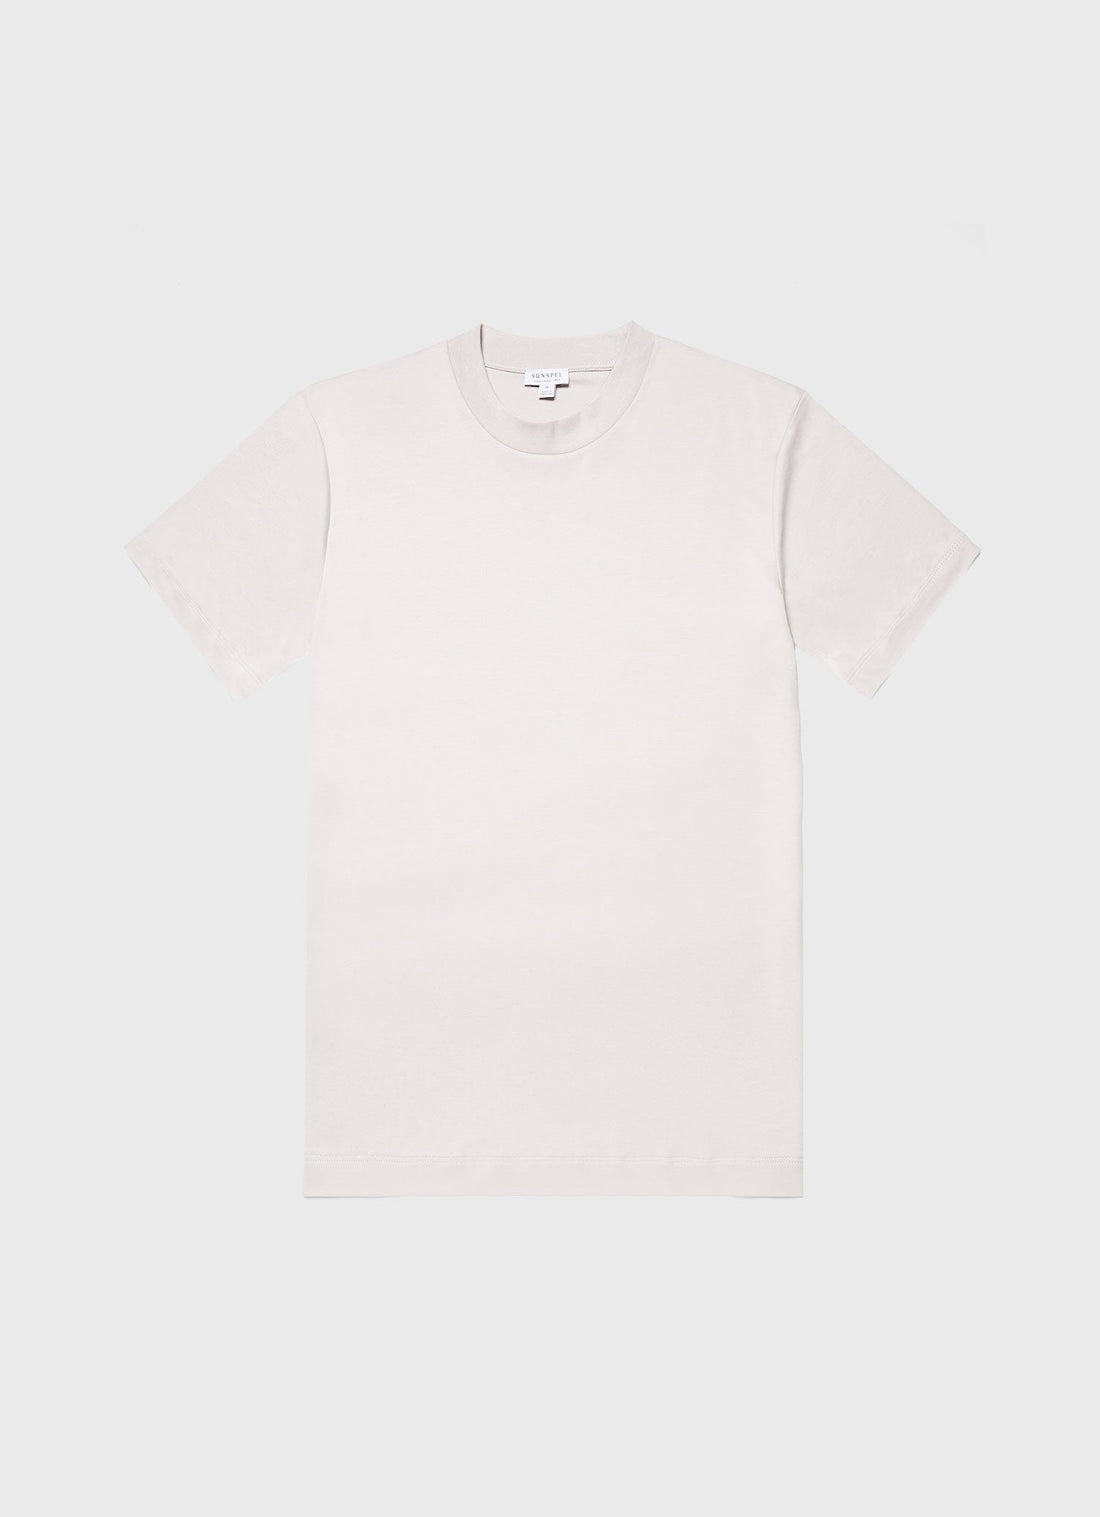 Men's Relaxed Fit Heavyweight T-shirt in Putty